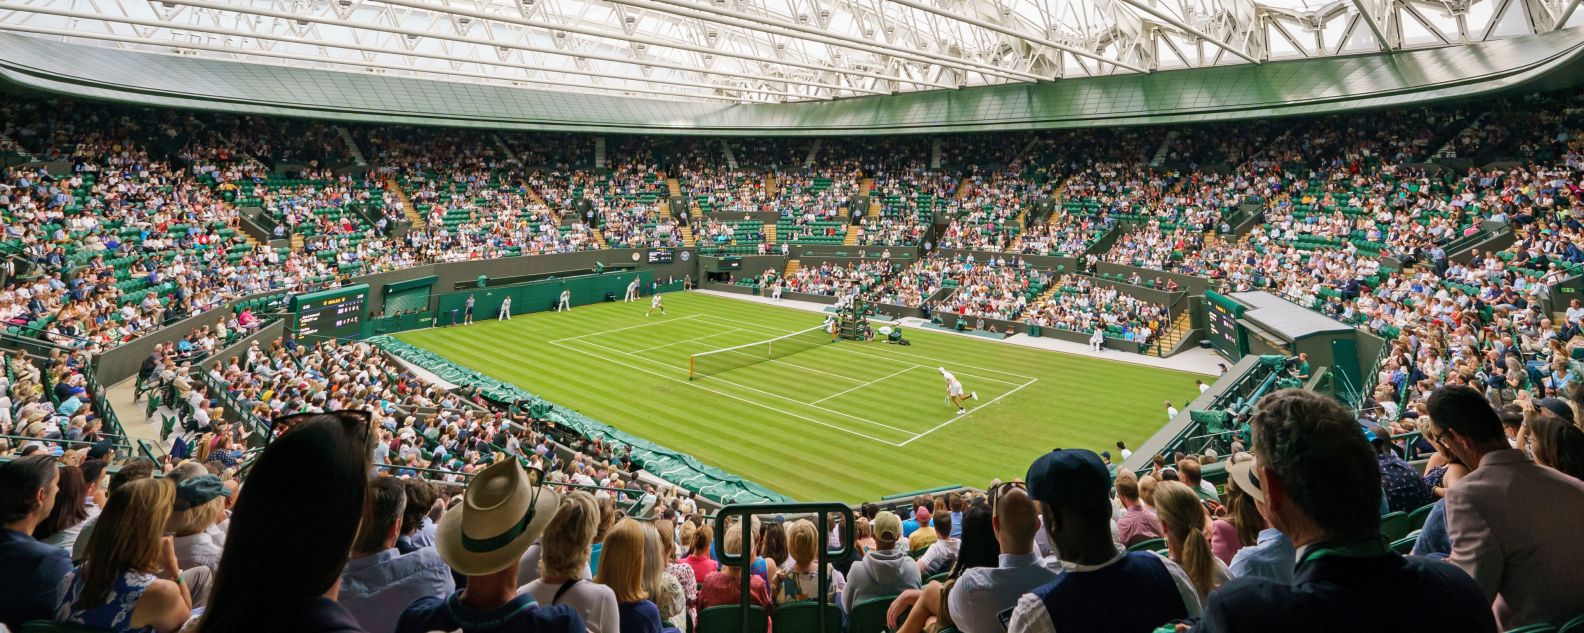 Inside view of Wimbledon Stadium with the people watching a tennis match